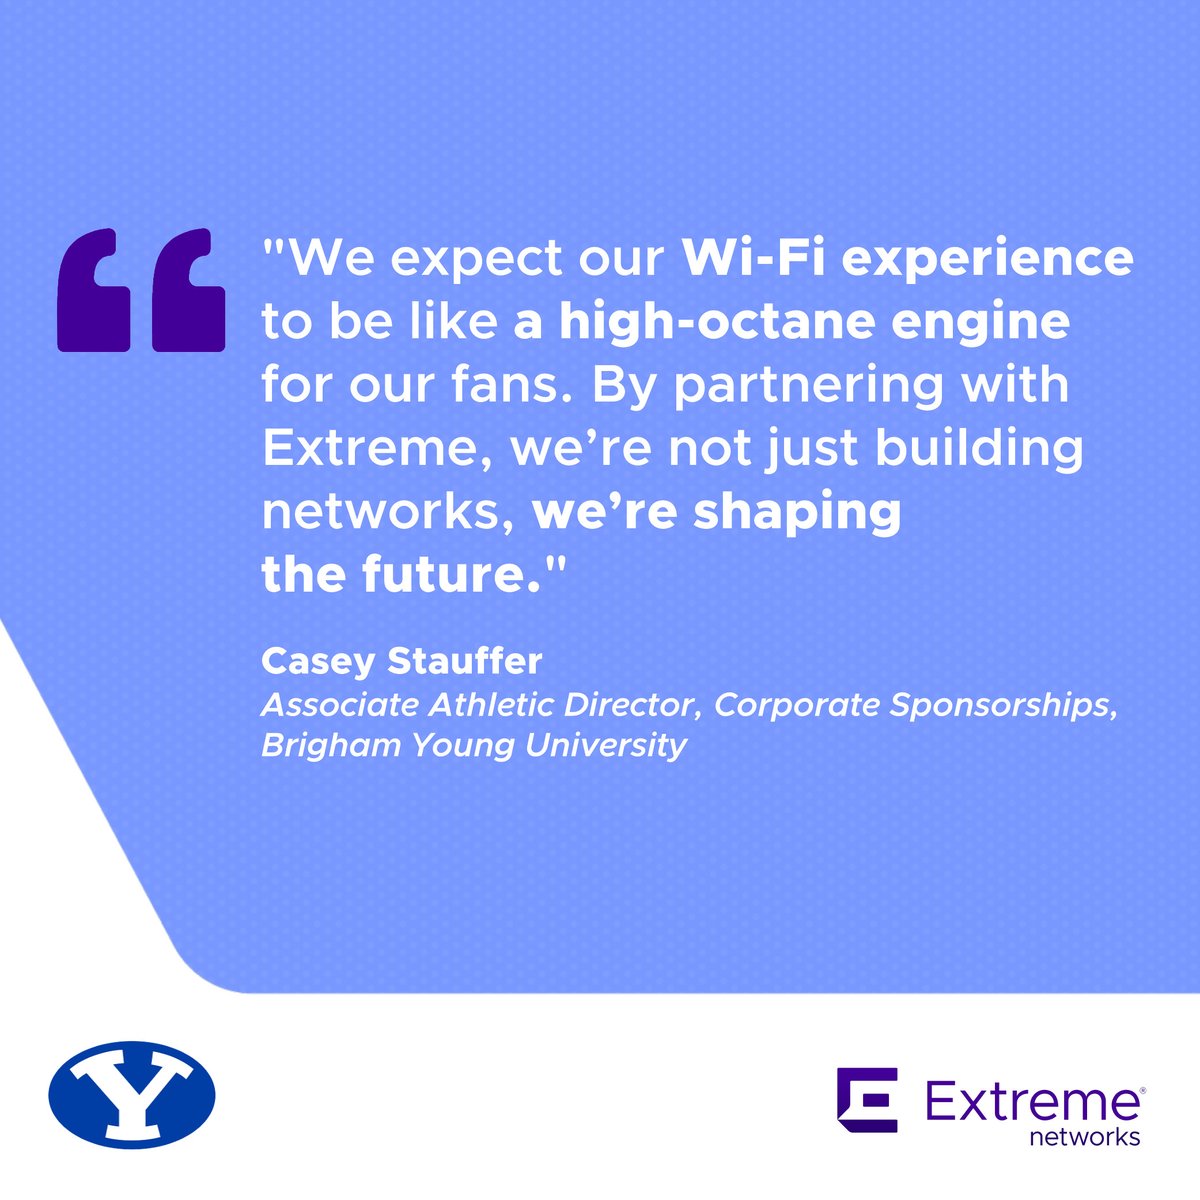 Brigham Young University's LaVell Edwards Stadium will use its new outdoor #WiFi6E network to accommodate 64,000 fans each game day and improve fan experiences. Learn more: investor.extremenetworks.com/news-releases/…